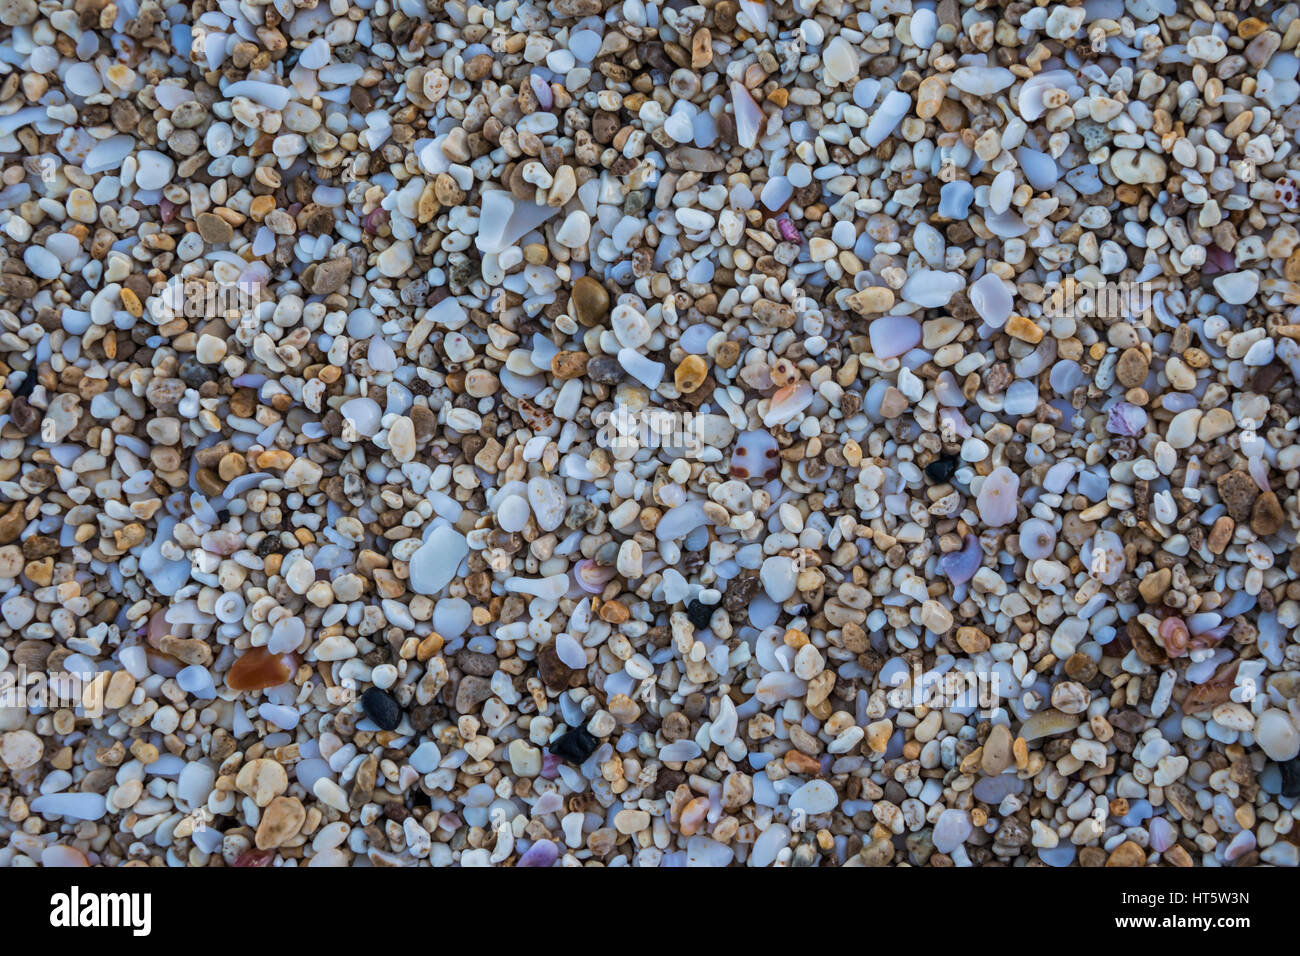 A close up view of pebbles and broken shells along the beach. Stock Photo